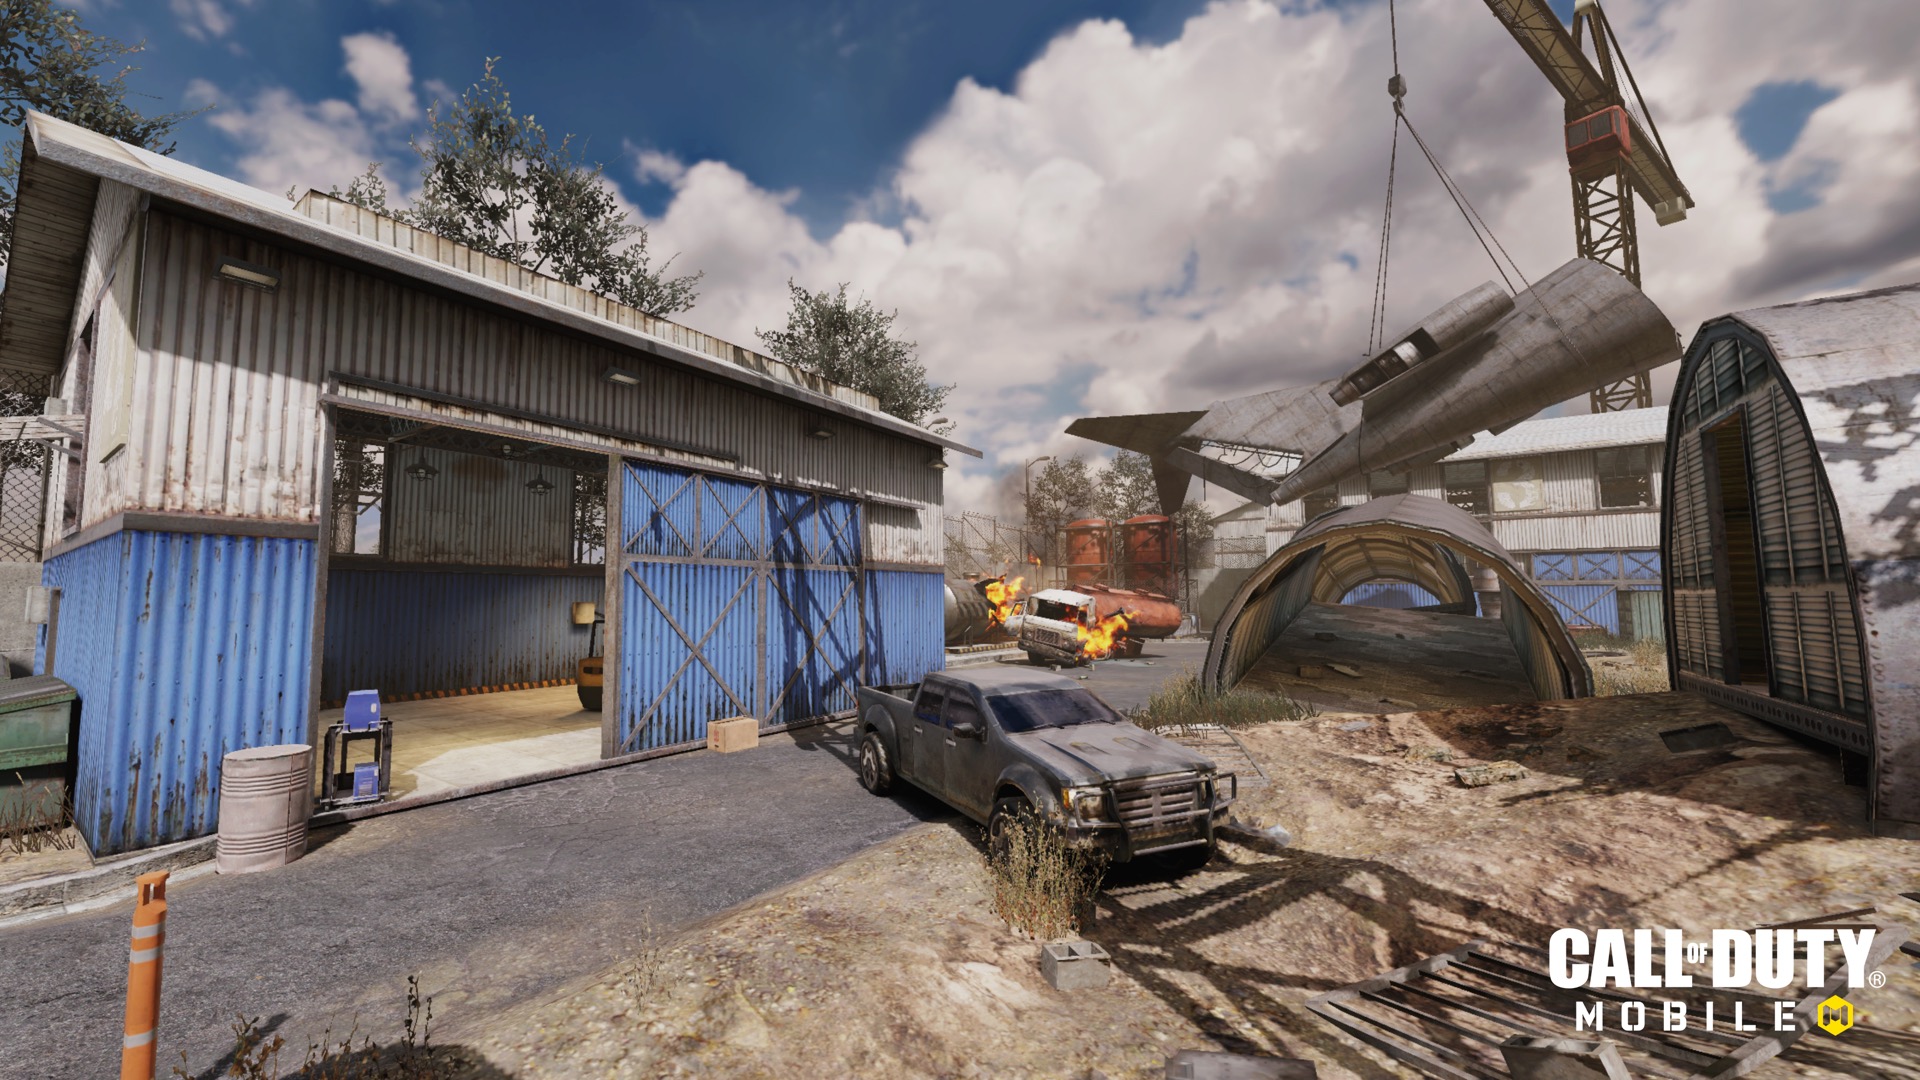 call of duty 3 maps Call Of Duty Mobile Season 3 Teasers Reveal New Maps And Modes Techradar call of duty 3 maps